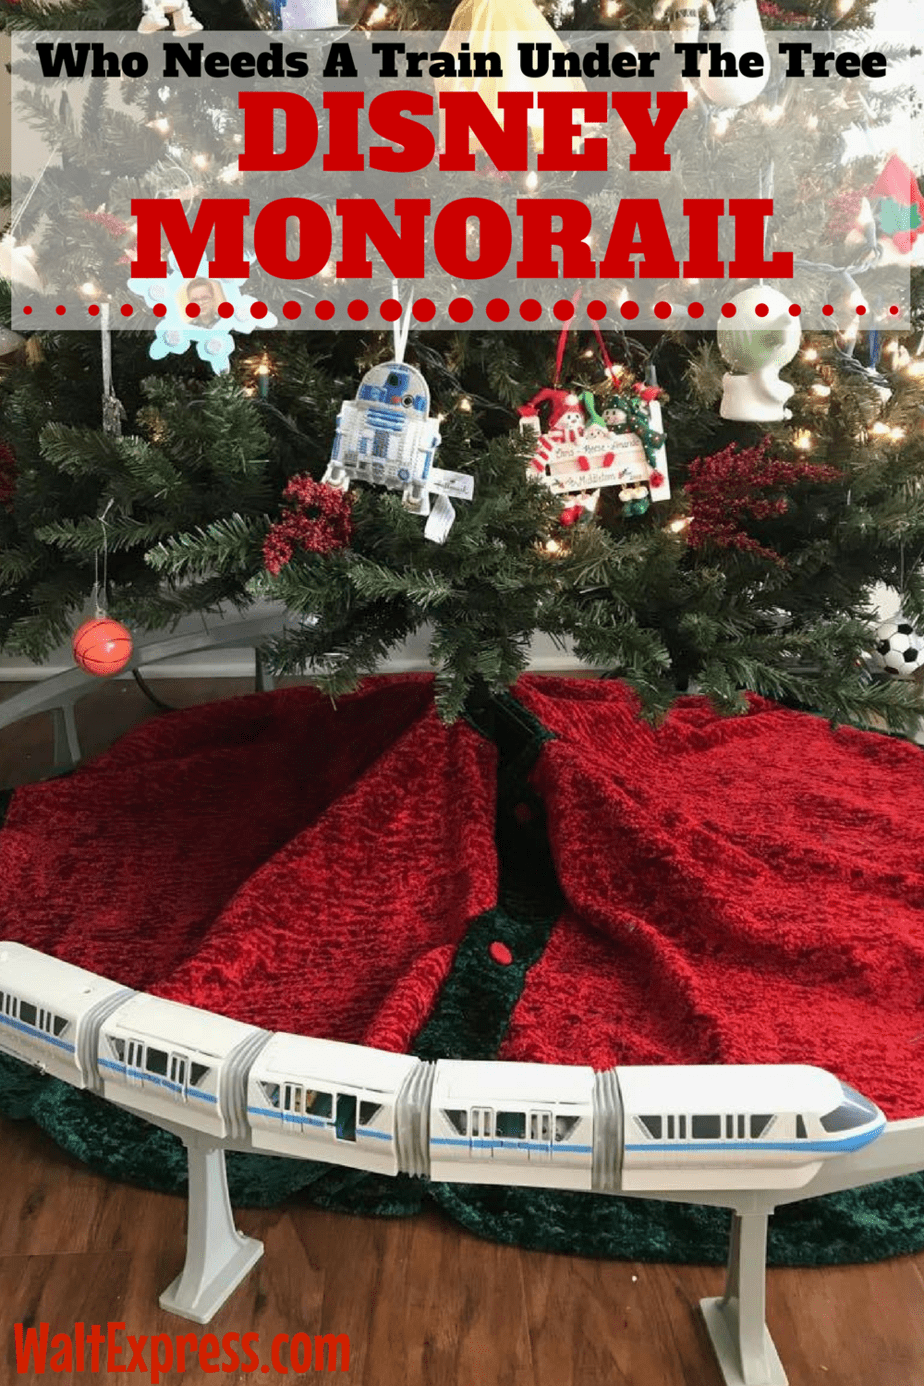 Who Needs A Train Around The Tree When You Can Have The Disney Monorail?